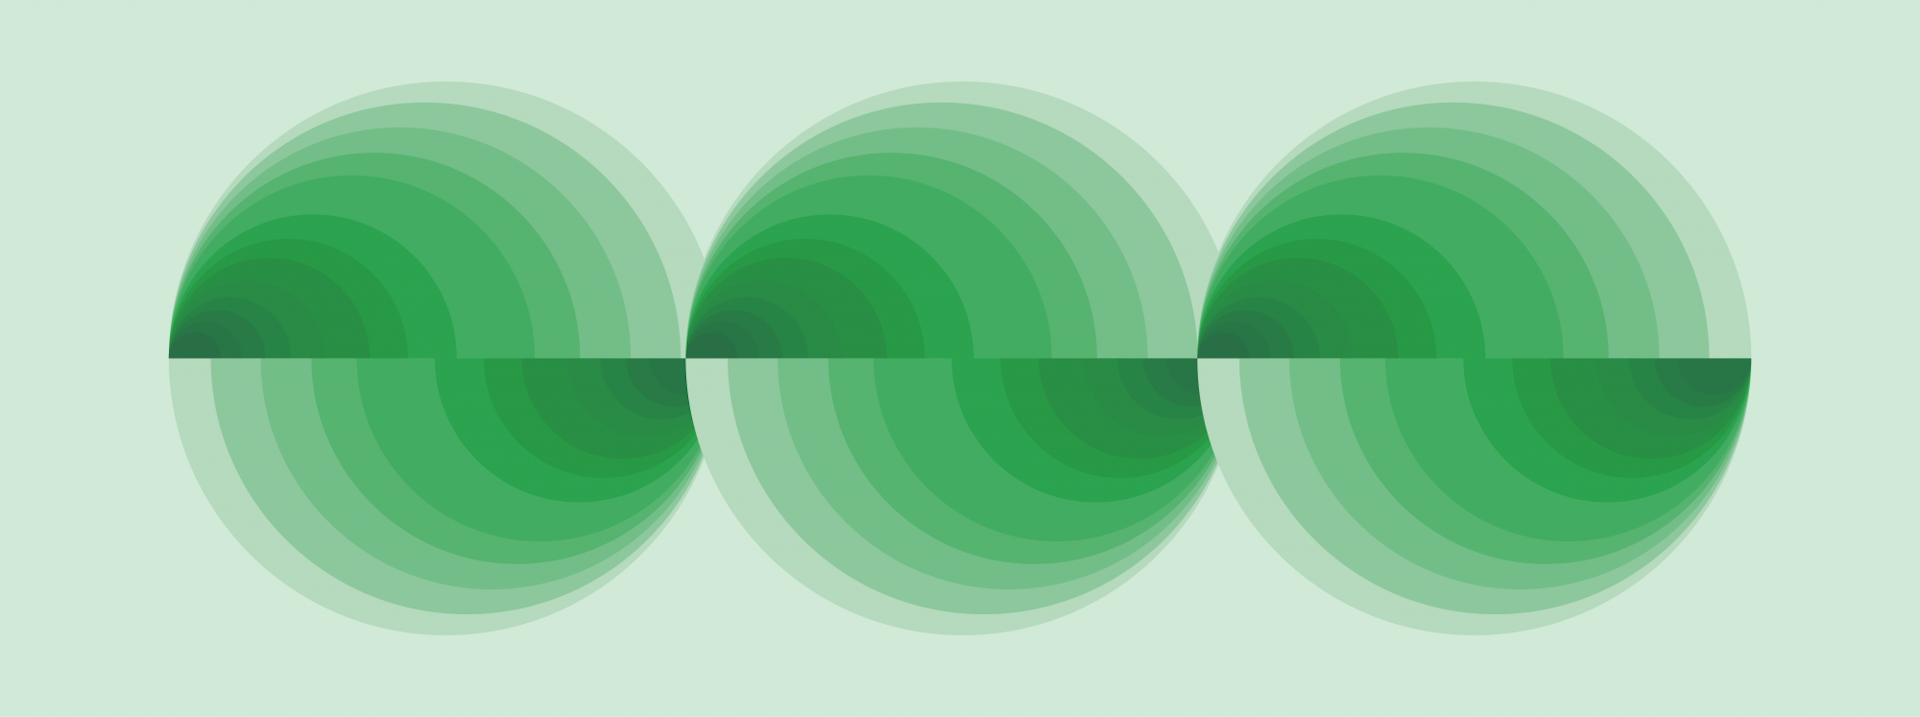 An illustration of three circles with gradients of green rippling through them to create the illusion of motion.